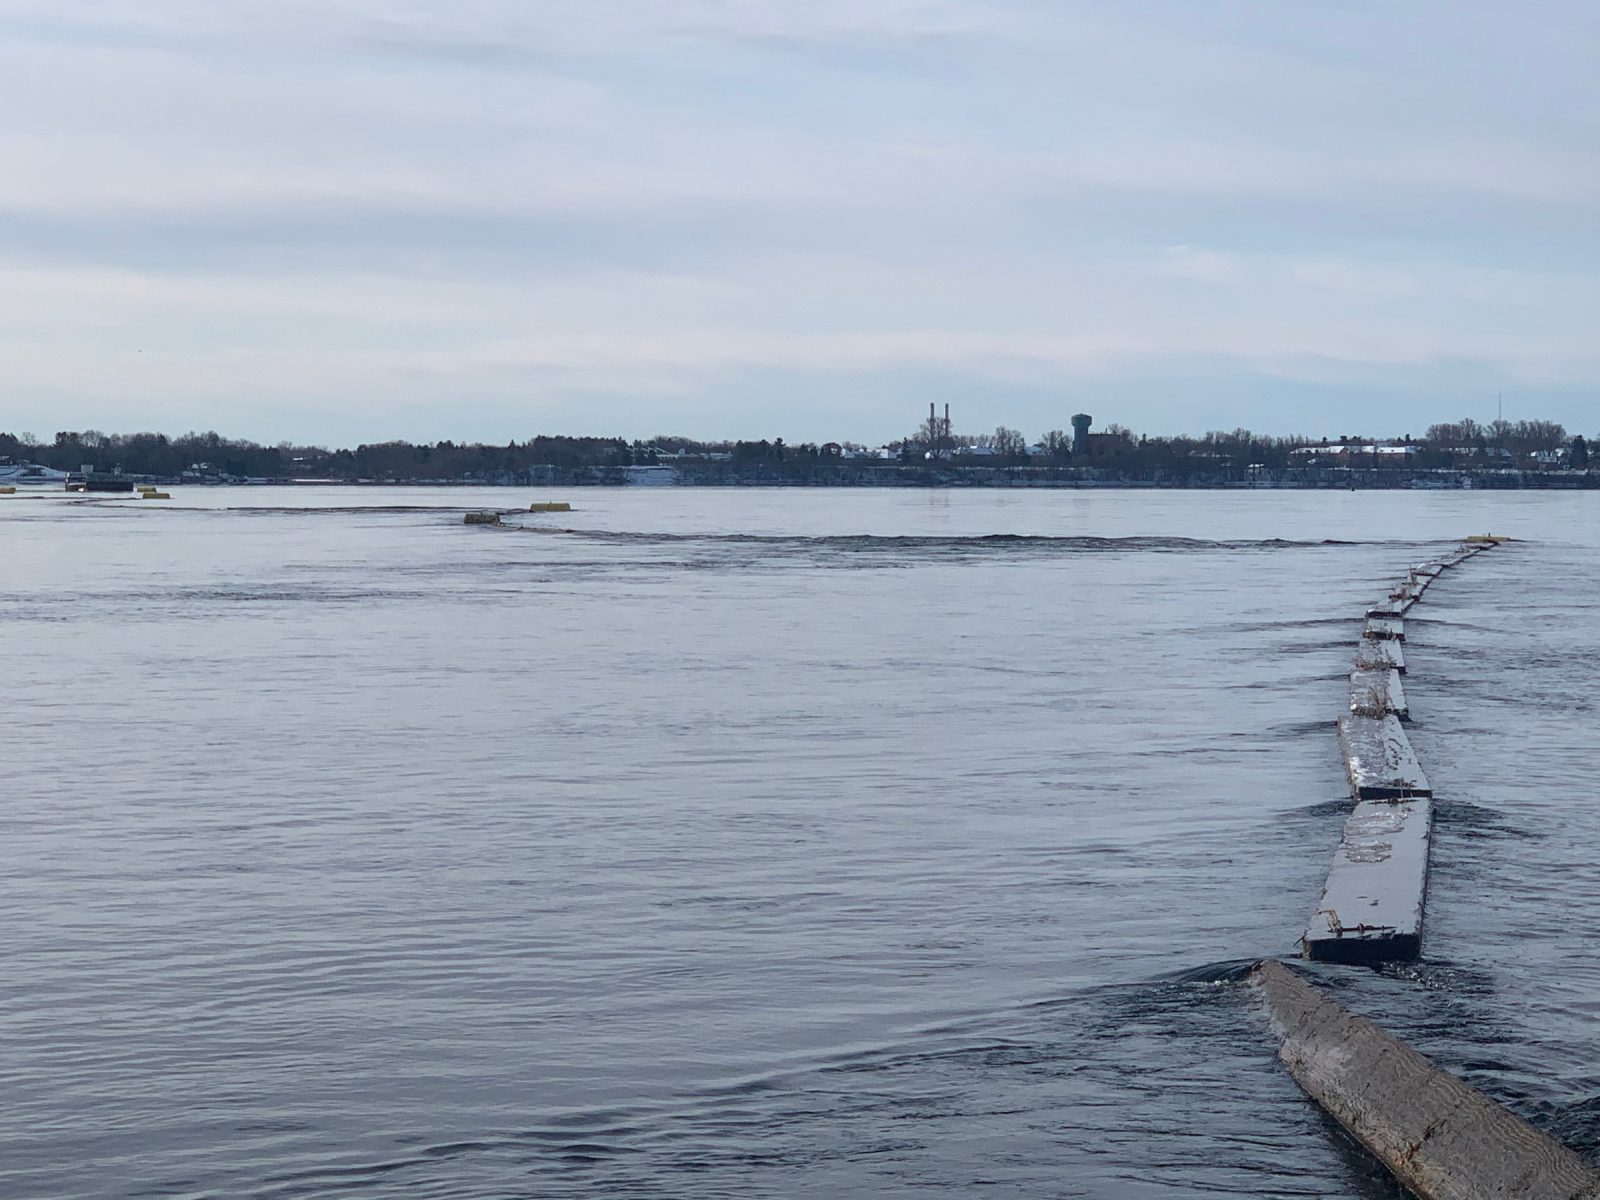 Installation of St. Lawrence River Ice Booms Underway